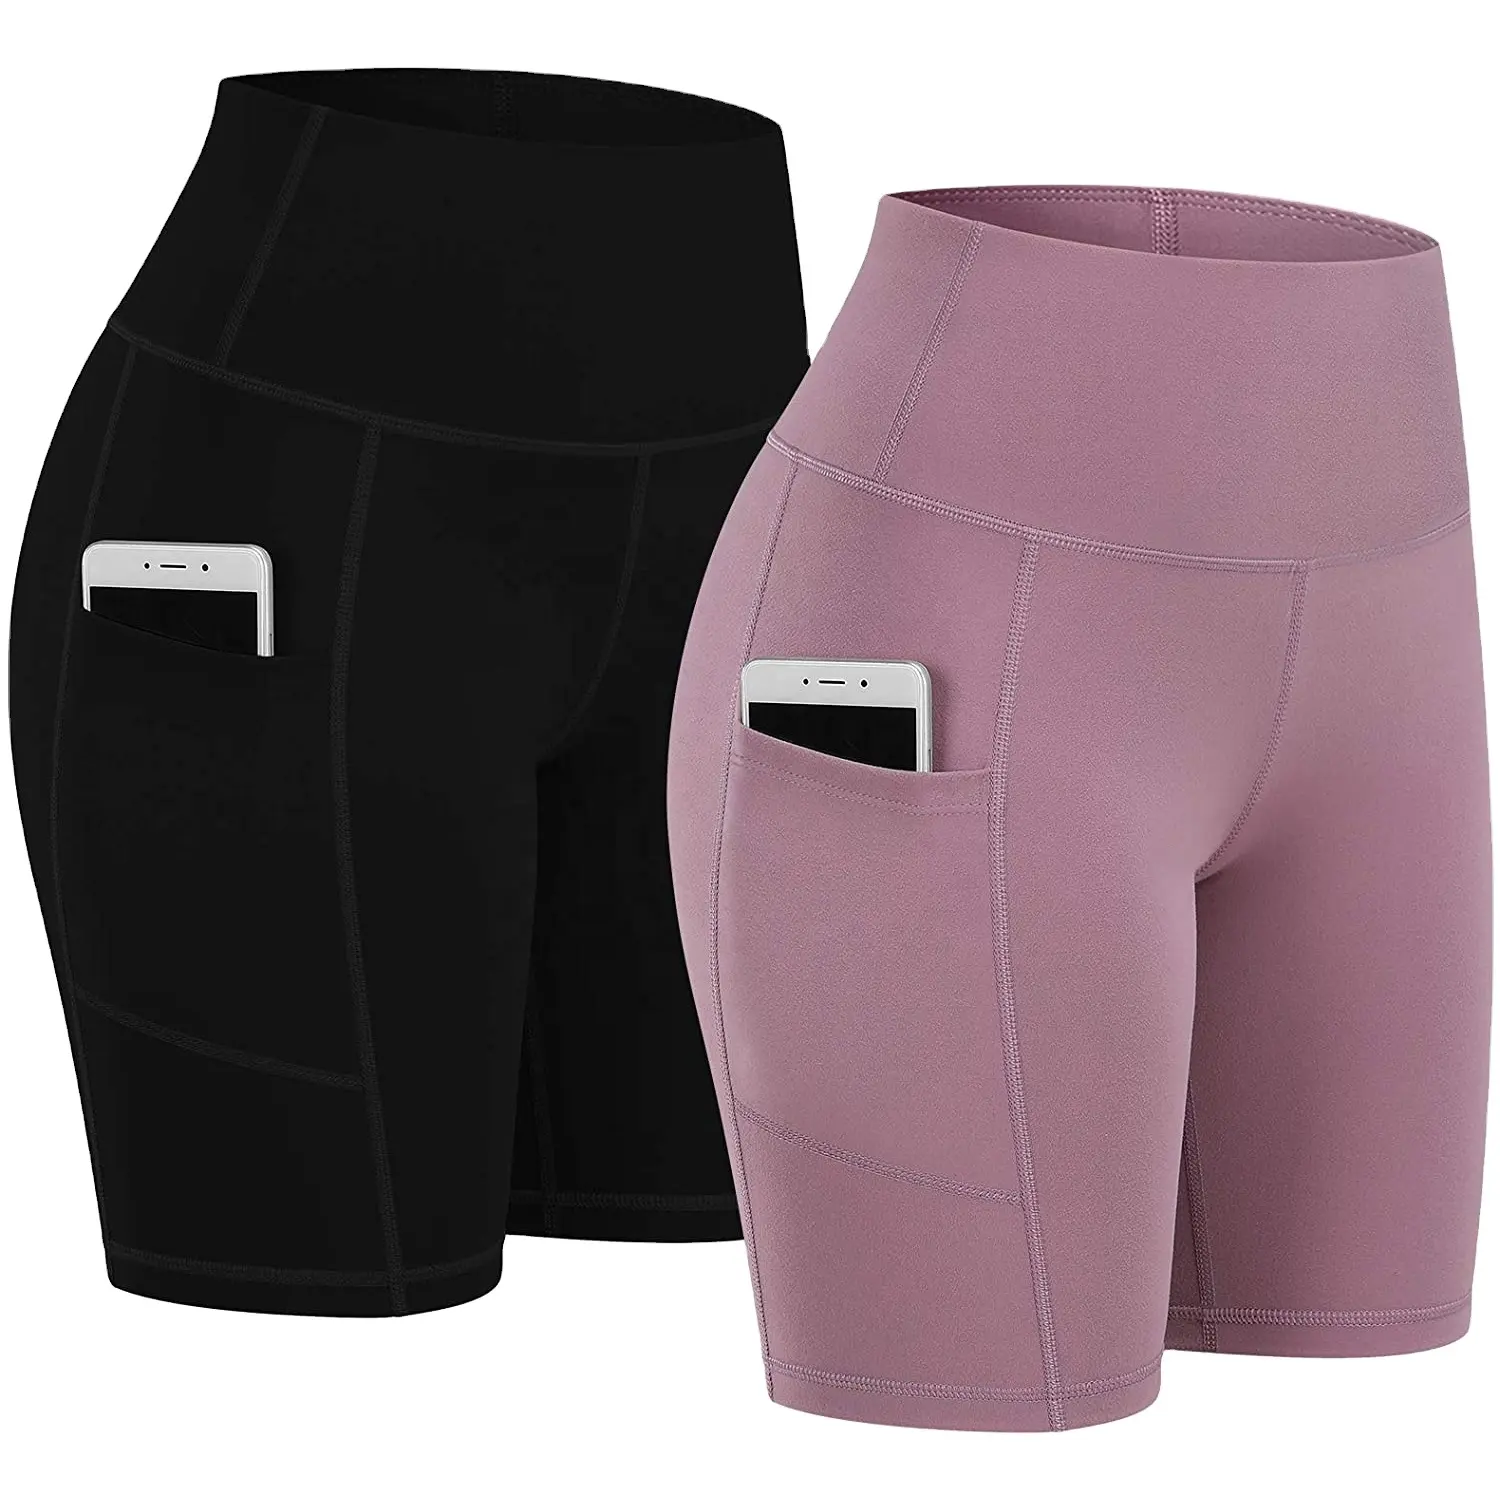 Latest Women Sports Jogging Clothing Biker shorts Ladies Outfit BreathableJumpsuits Sports gym running pink and black 502 set